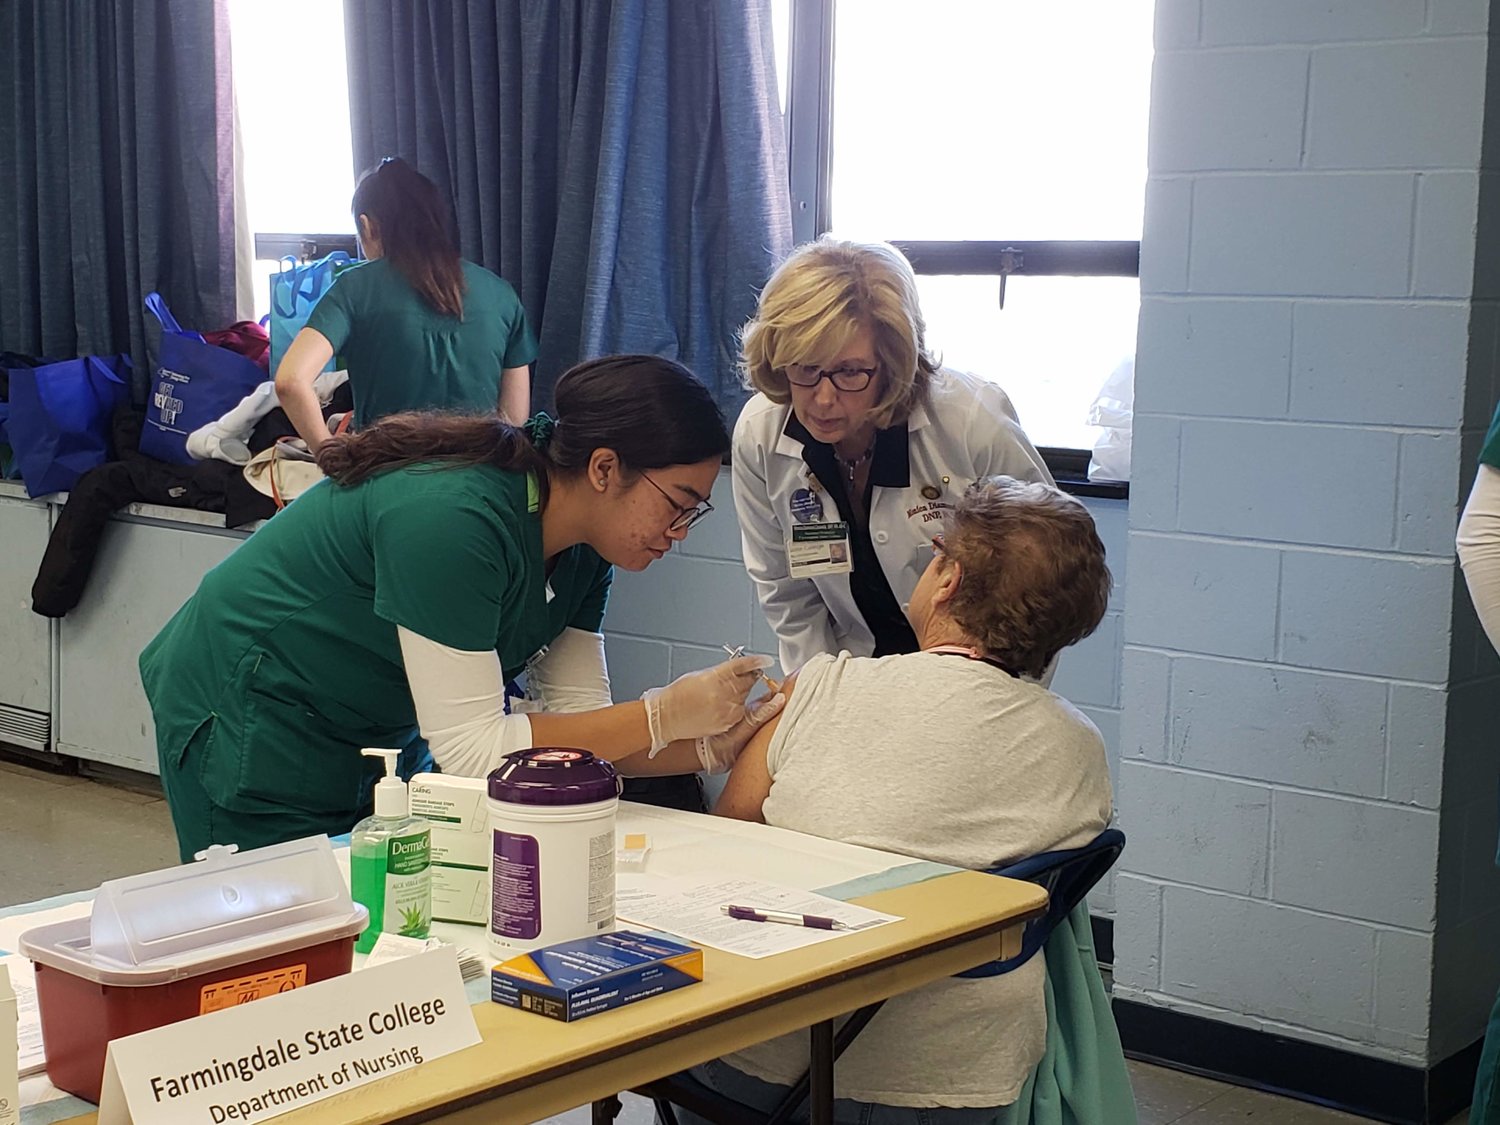 Farmingdale State College nursing student, Karla Chelsea, left, administered a flu shot to Freeporter Margret Bade, 76, right, while Assistant Professor from the Department of Nursing, Monica Diamond, center, instructed and supervised Chelsea.